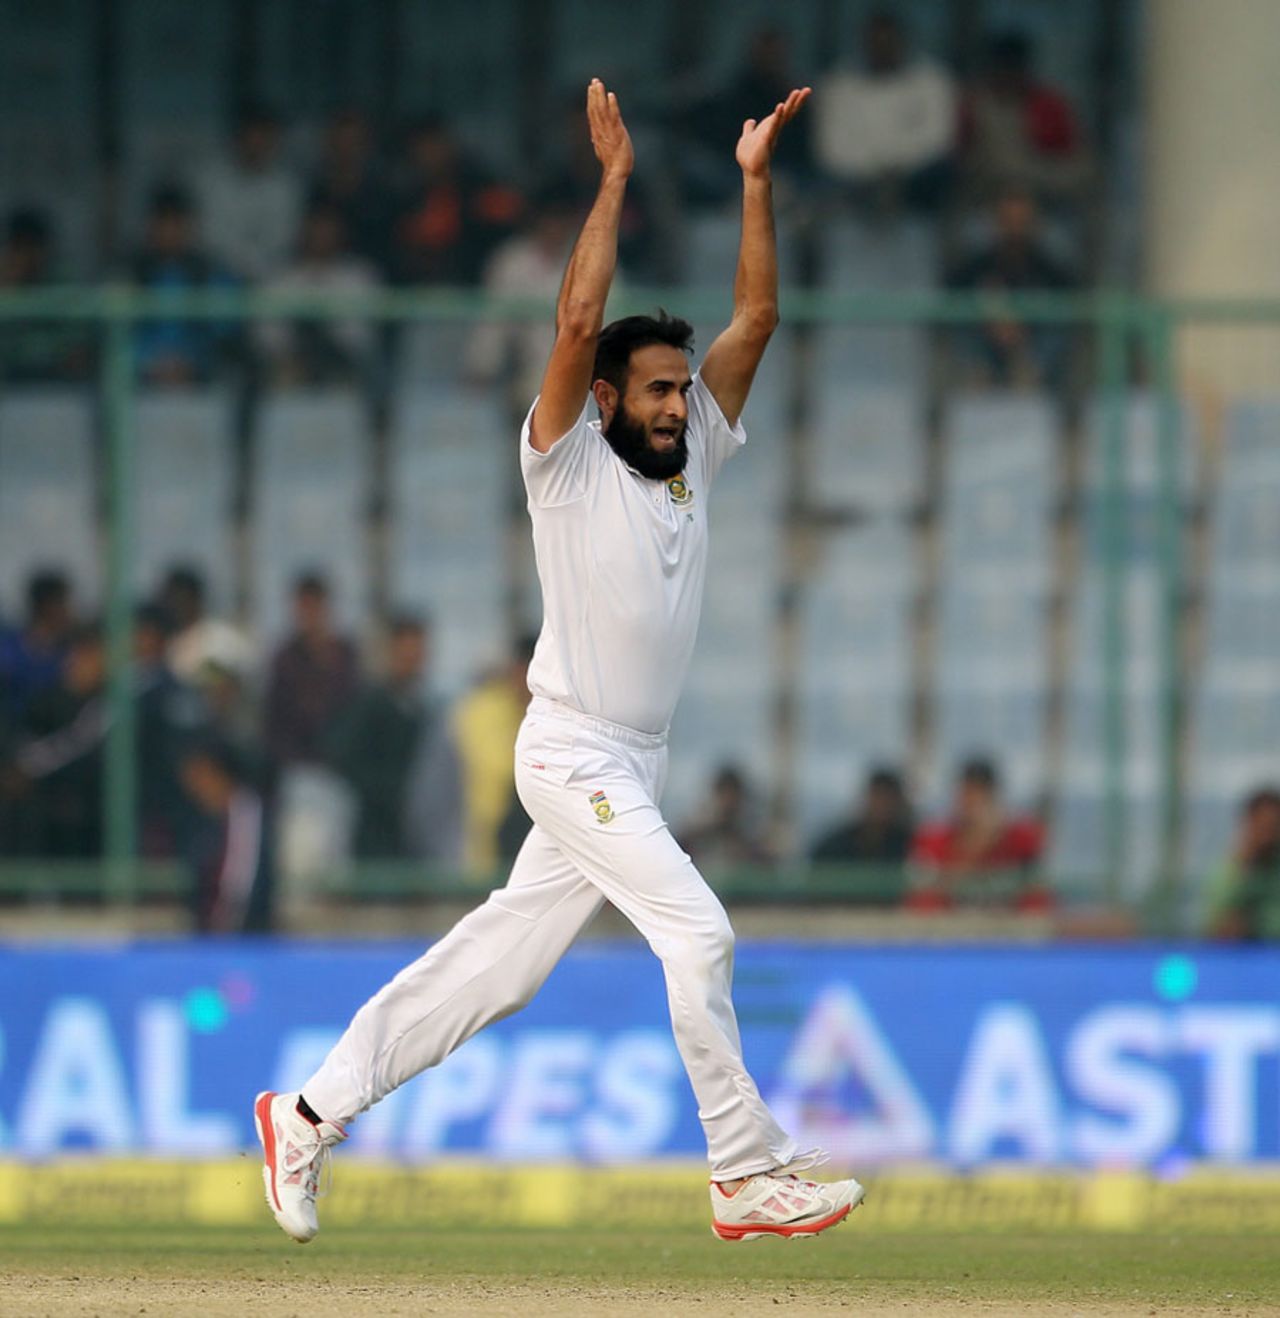 Imran Tahir thinks he has a wicket, India v South Africa, 4th Test, 1st day, Delhi, December 3, 2015